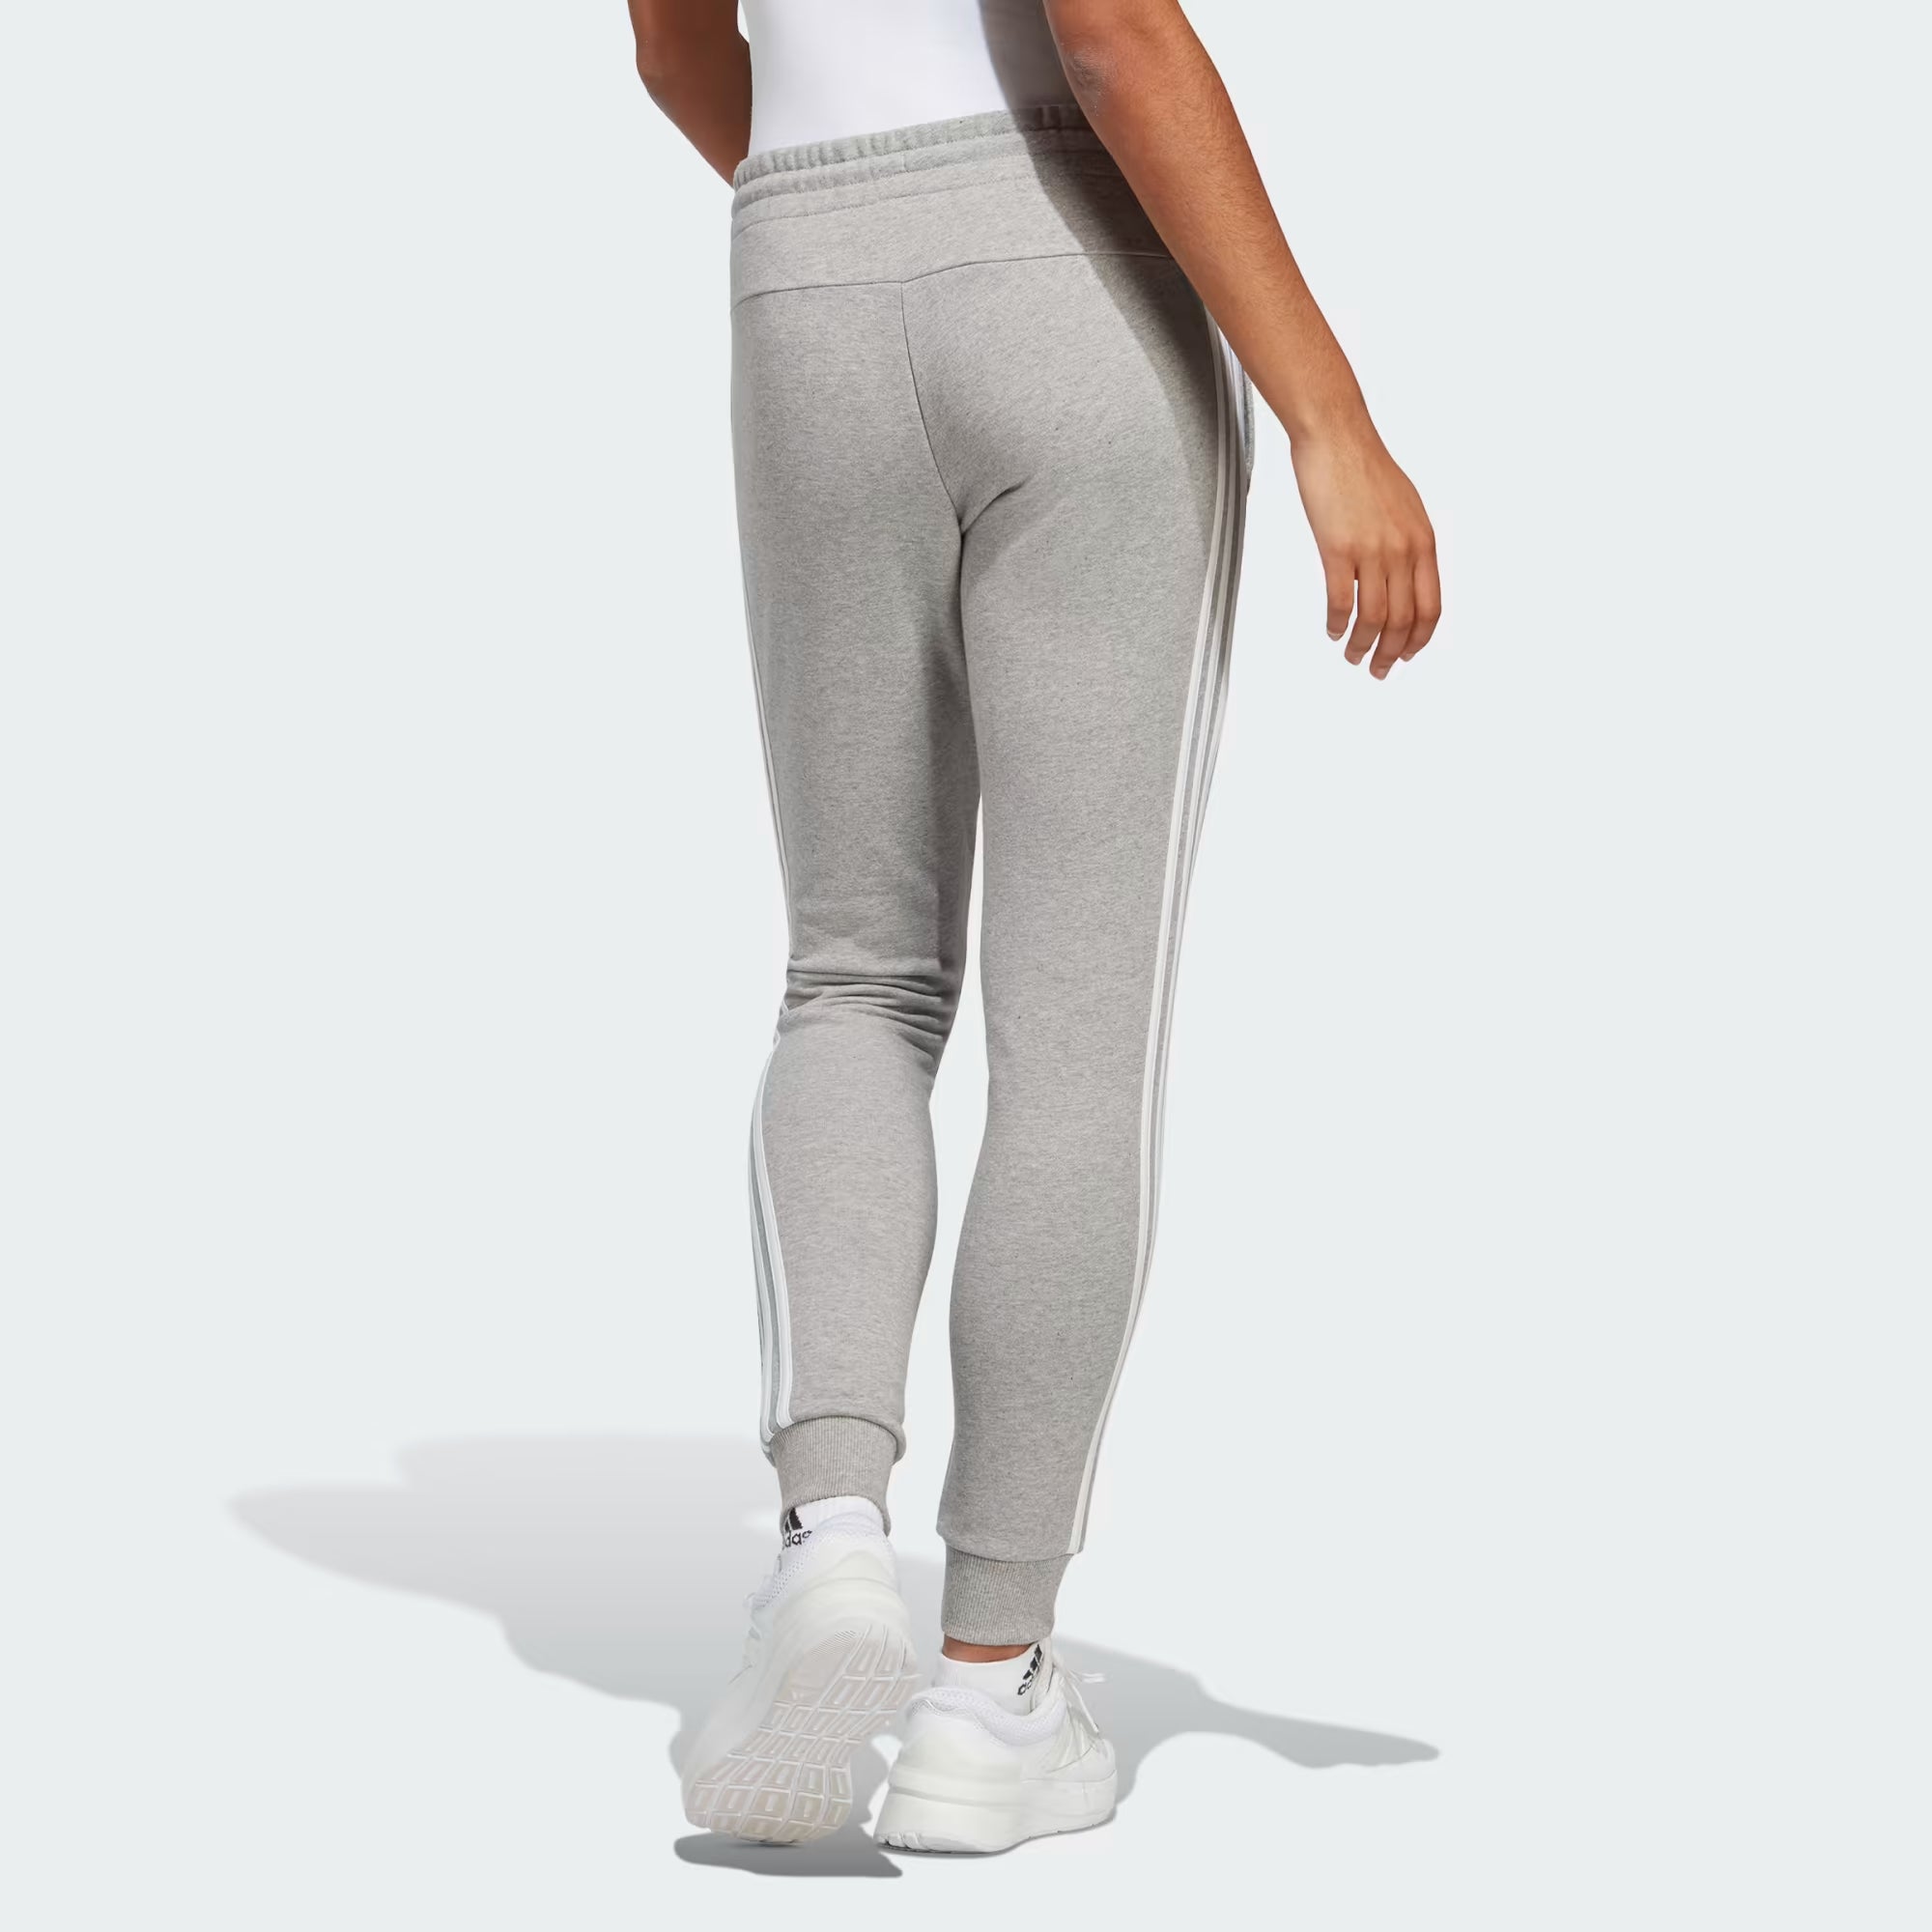 Adidas Essentials 3 Stripes French Terry Cuffed Pants - Women